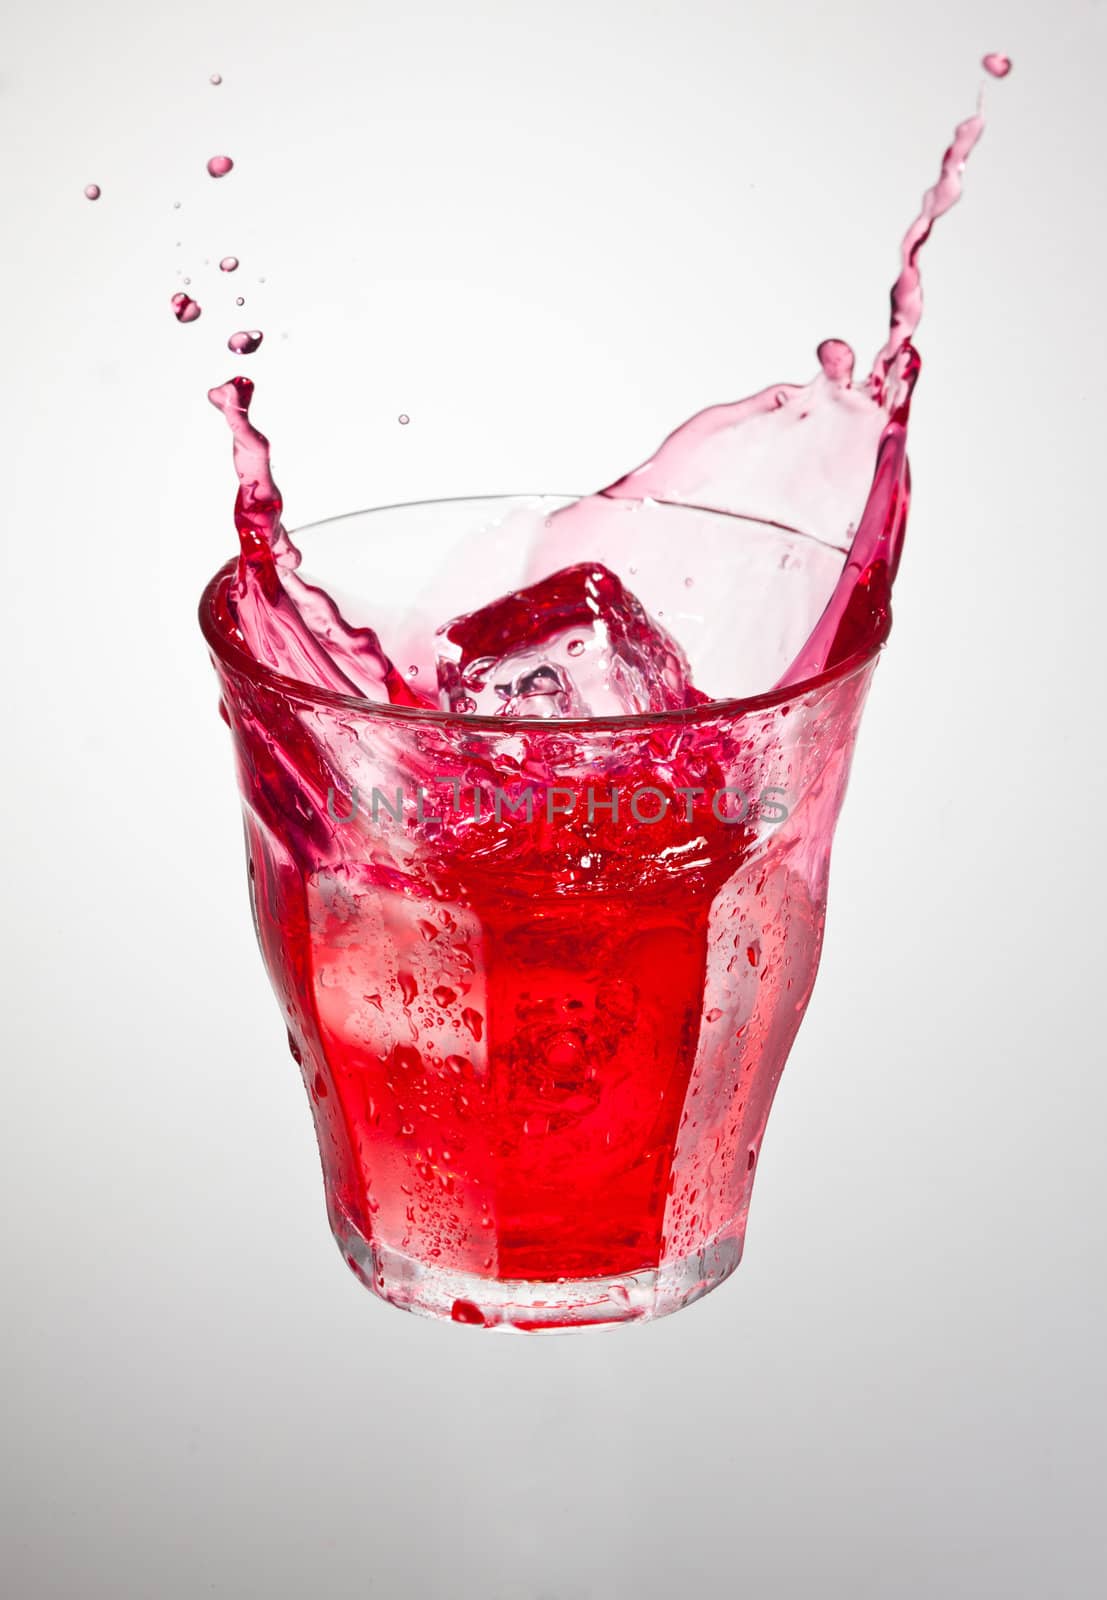 glass of red cranderry carbonated drink